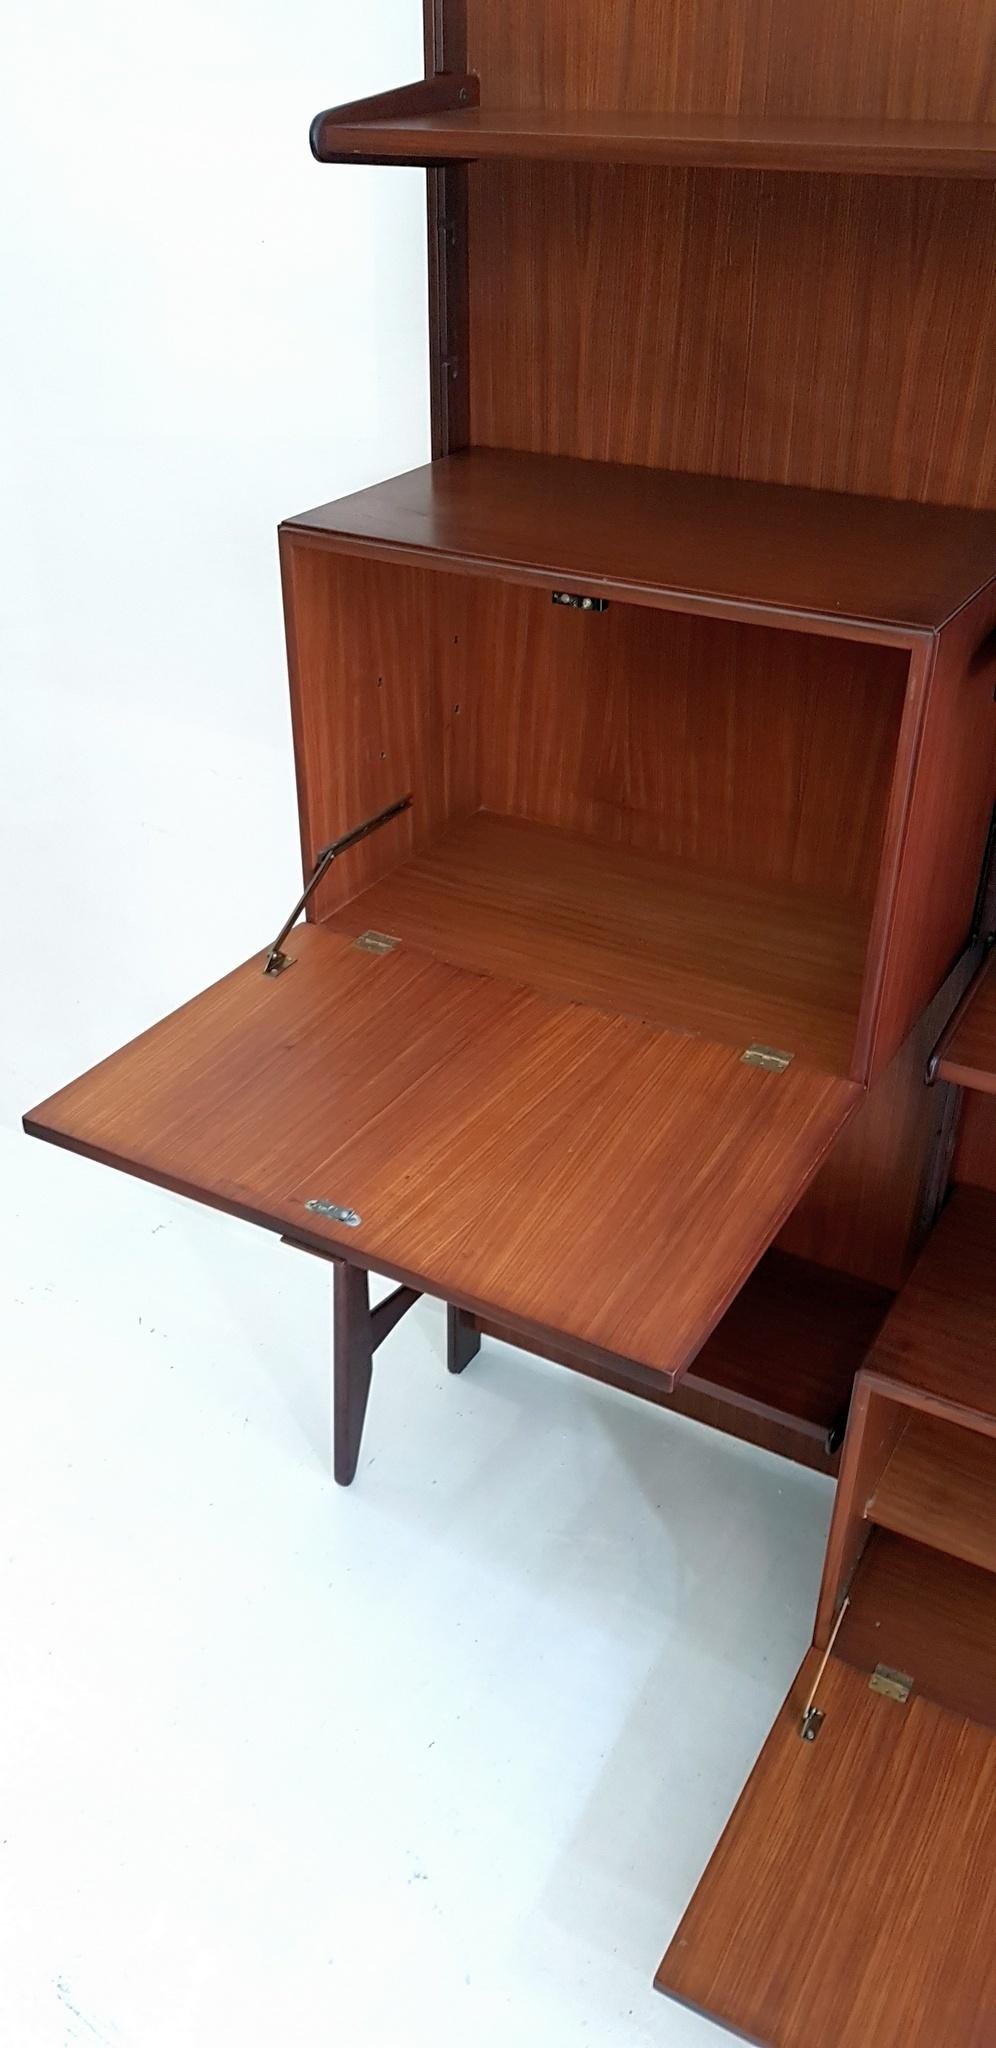 20th Century Midcentury Wall Unit Bookshelf by Fratelli Proserpio, Italy For Sale